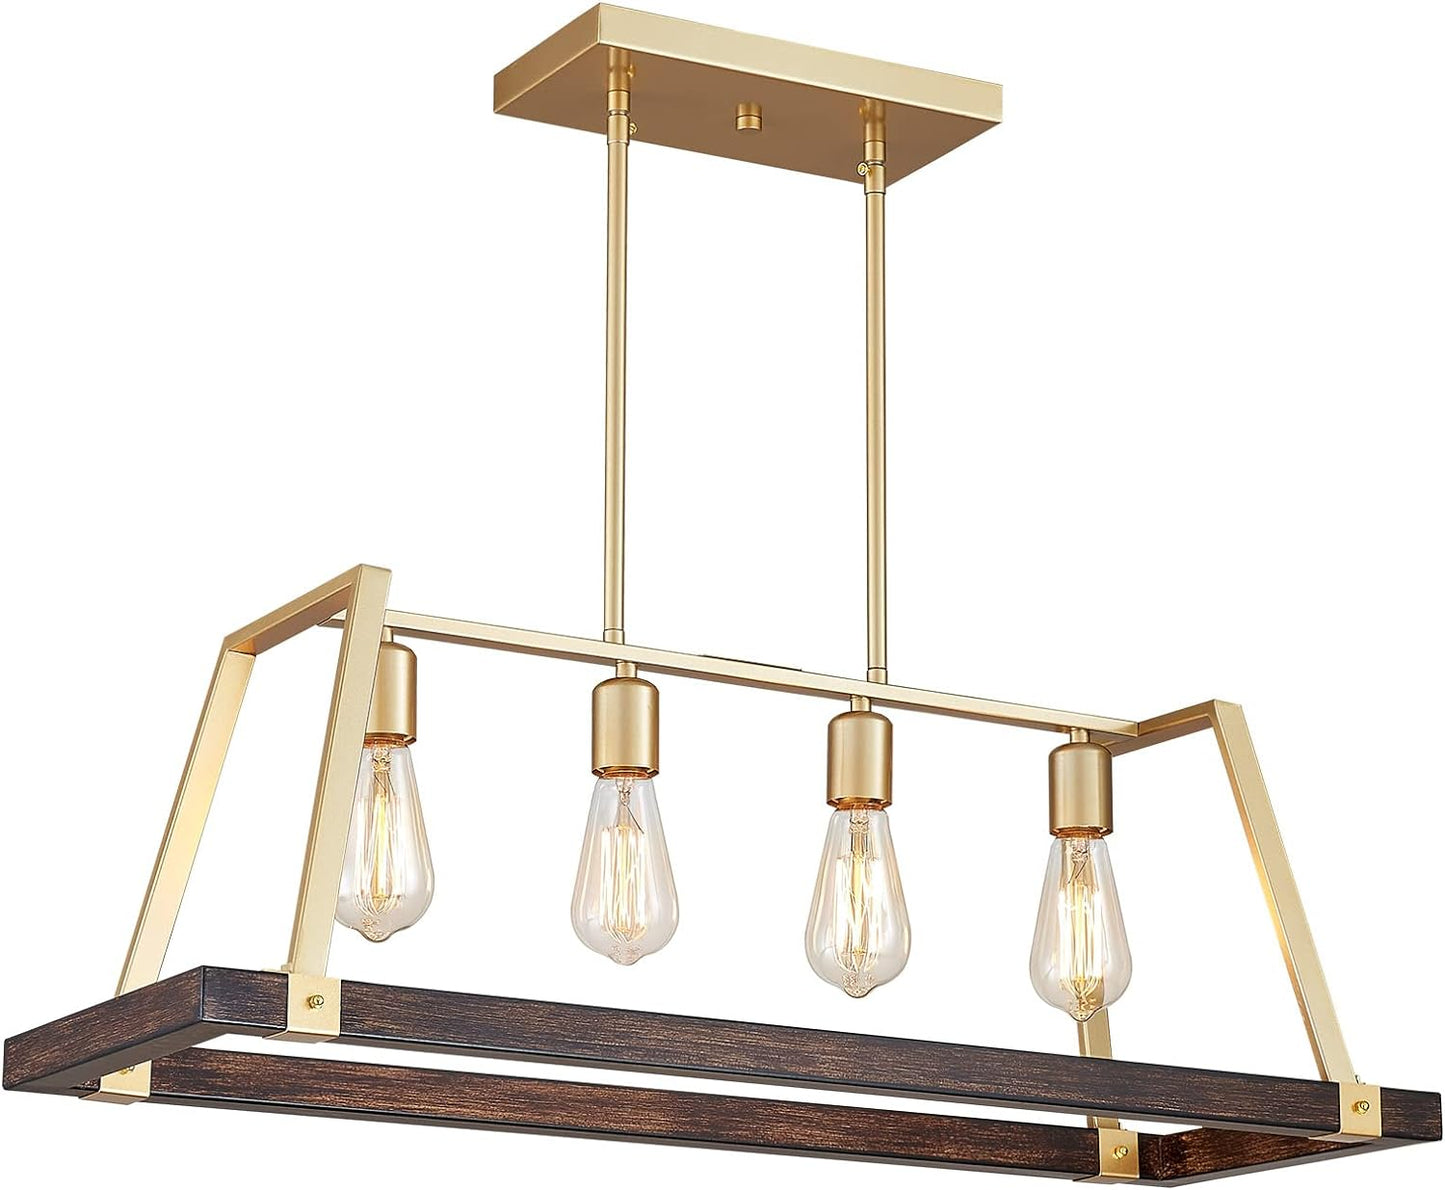 ANJIADENGSHI Painted Wood Color Golden Metal Finish Farmhouse Kitchen Island Pendant Lighting LED Fixture Dining Room Livingroom (Bulbs Not Included) (CL-LF097-Golden)